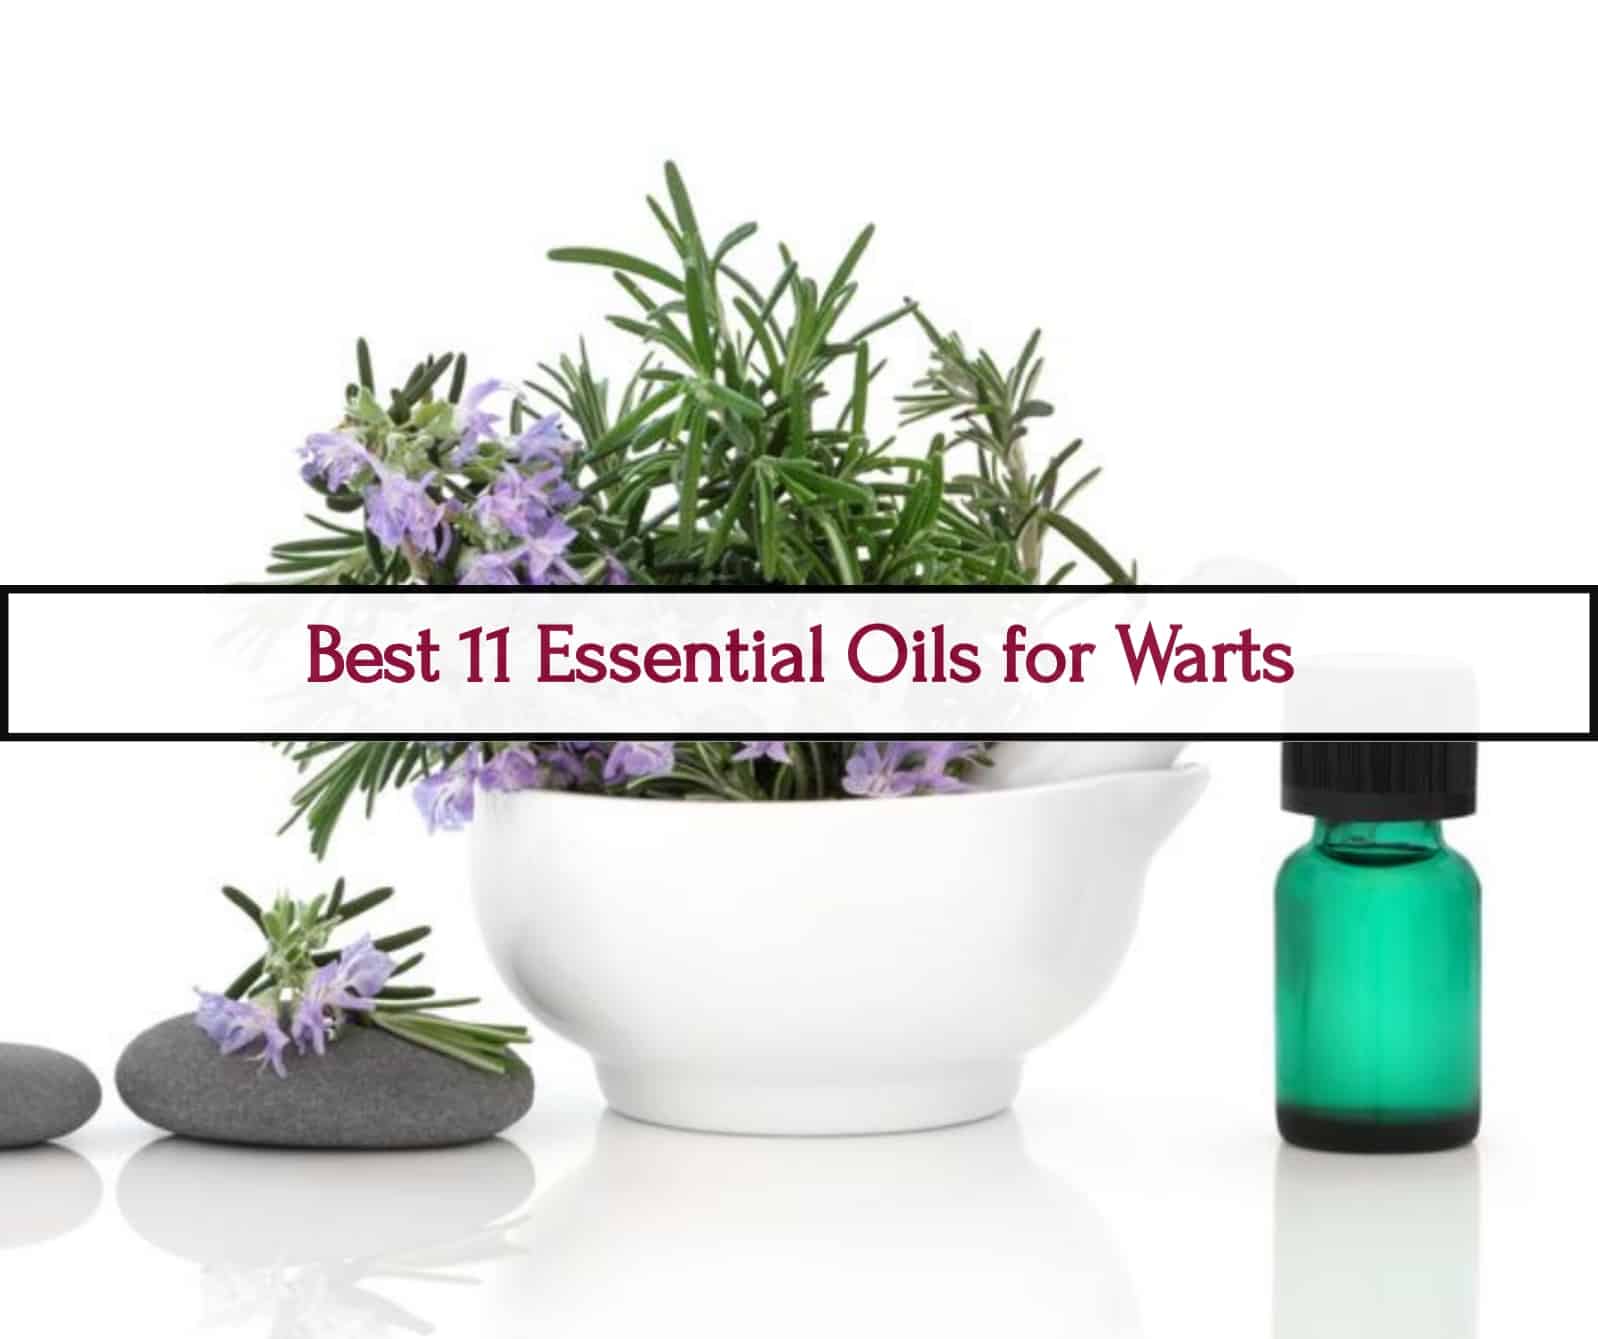 essential oils for warts